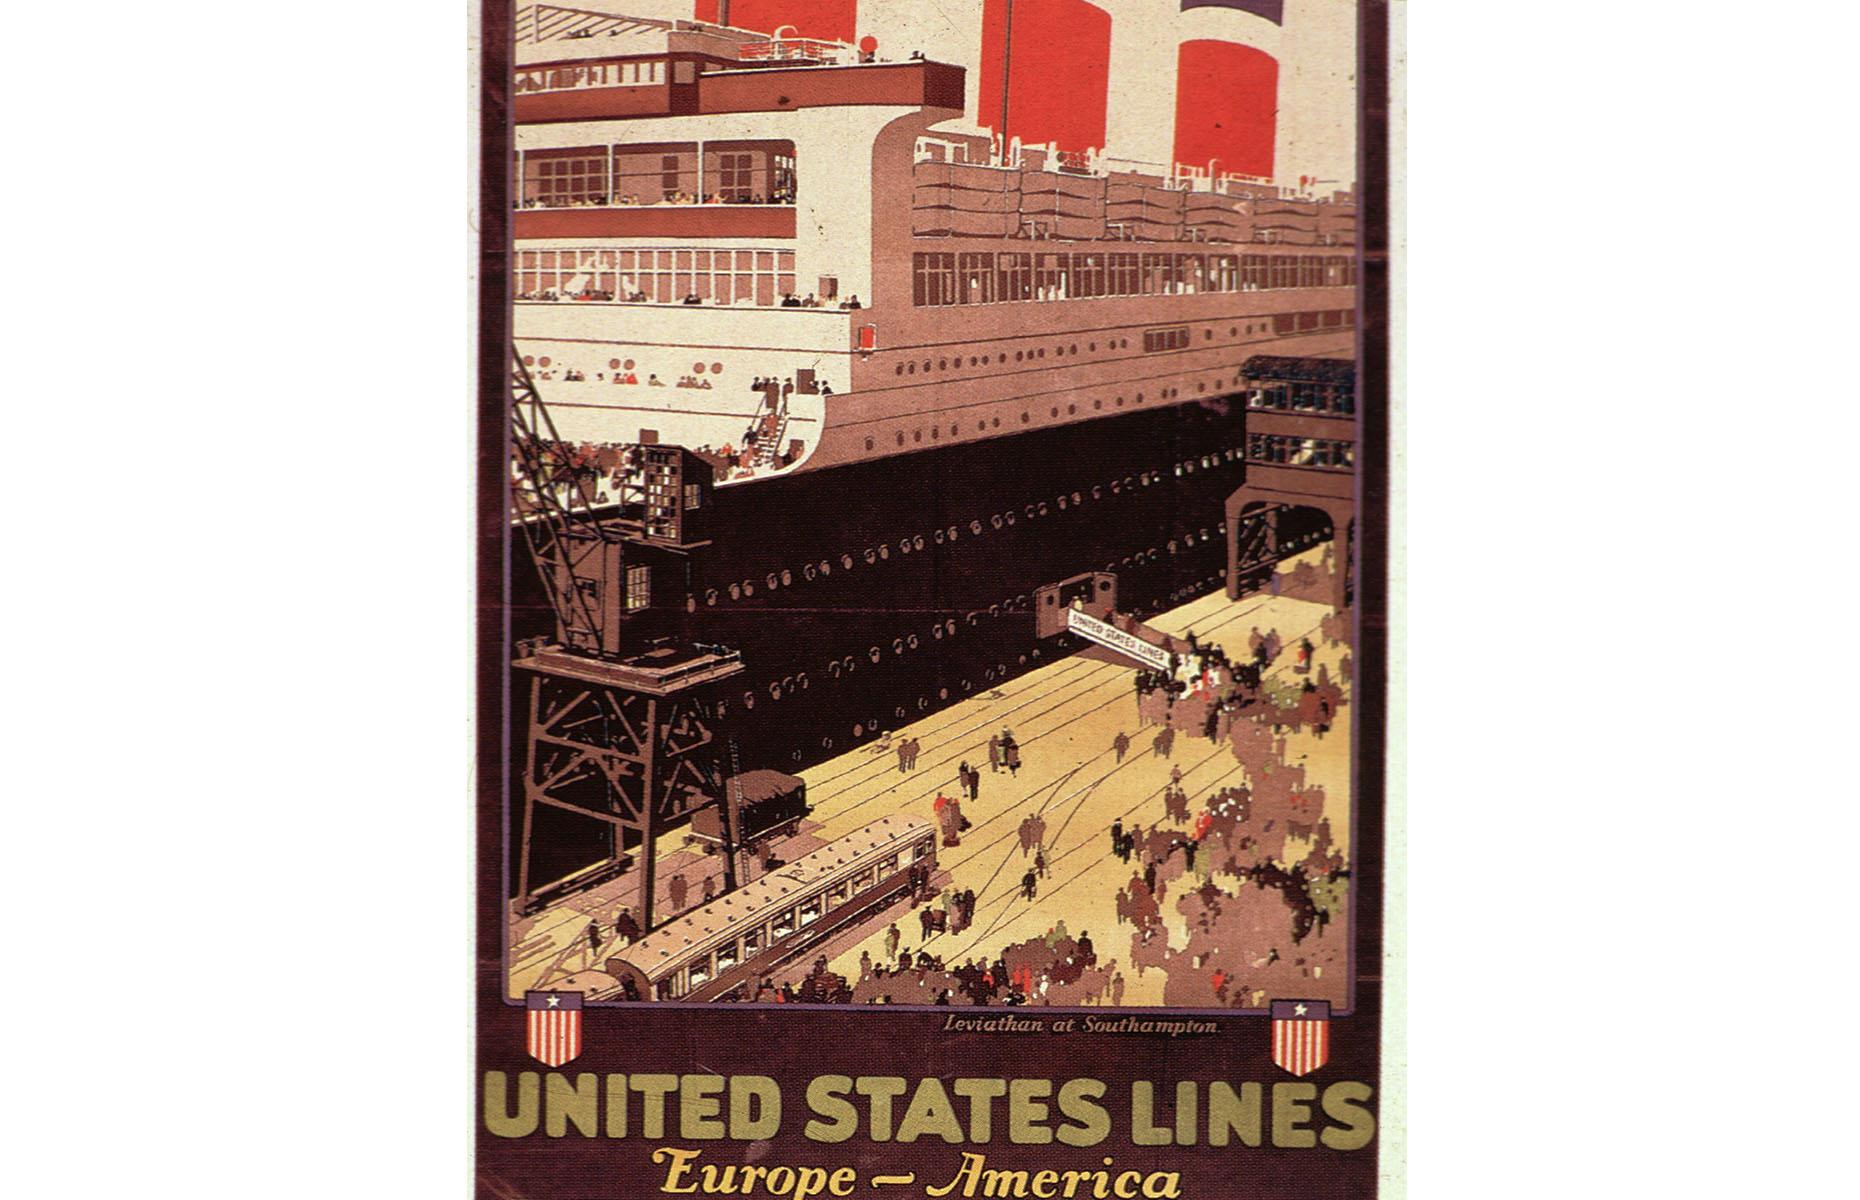 This advertising poster for United State Lines – a historic American shipping company – is straight to the point, showing off the grandeur of the SS Leviathan passenger vessel. Leviathan served as a troopship in the First World War, and she's pictured here as passengers board at Southampton.